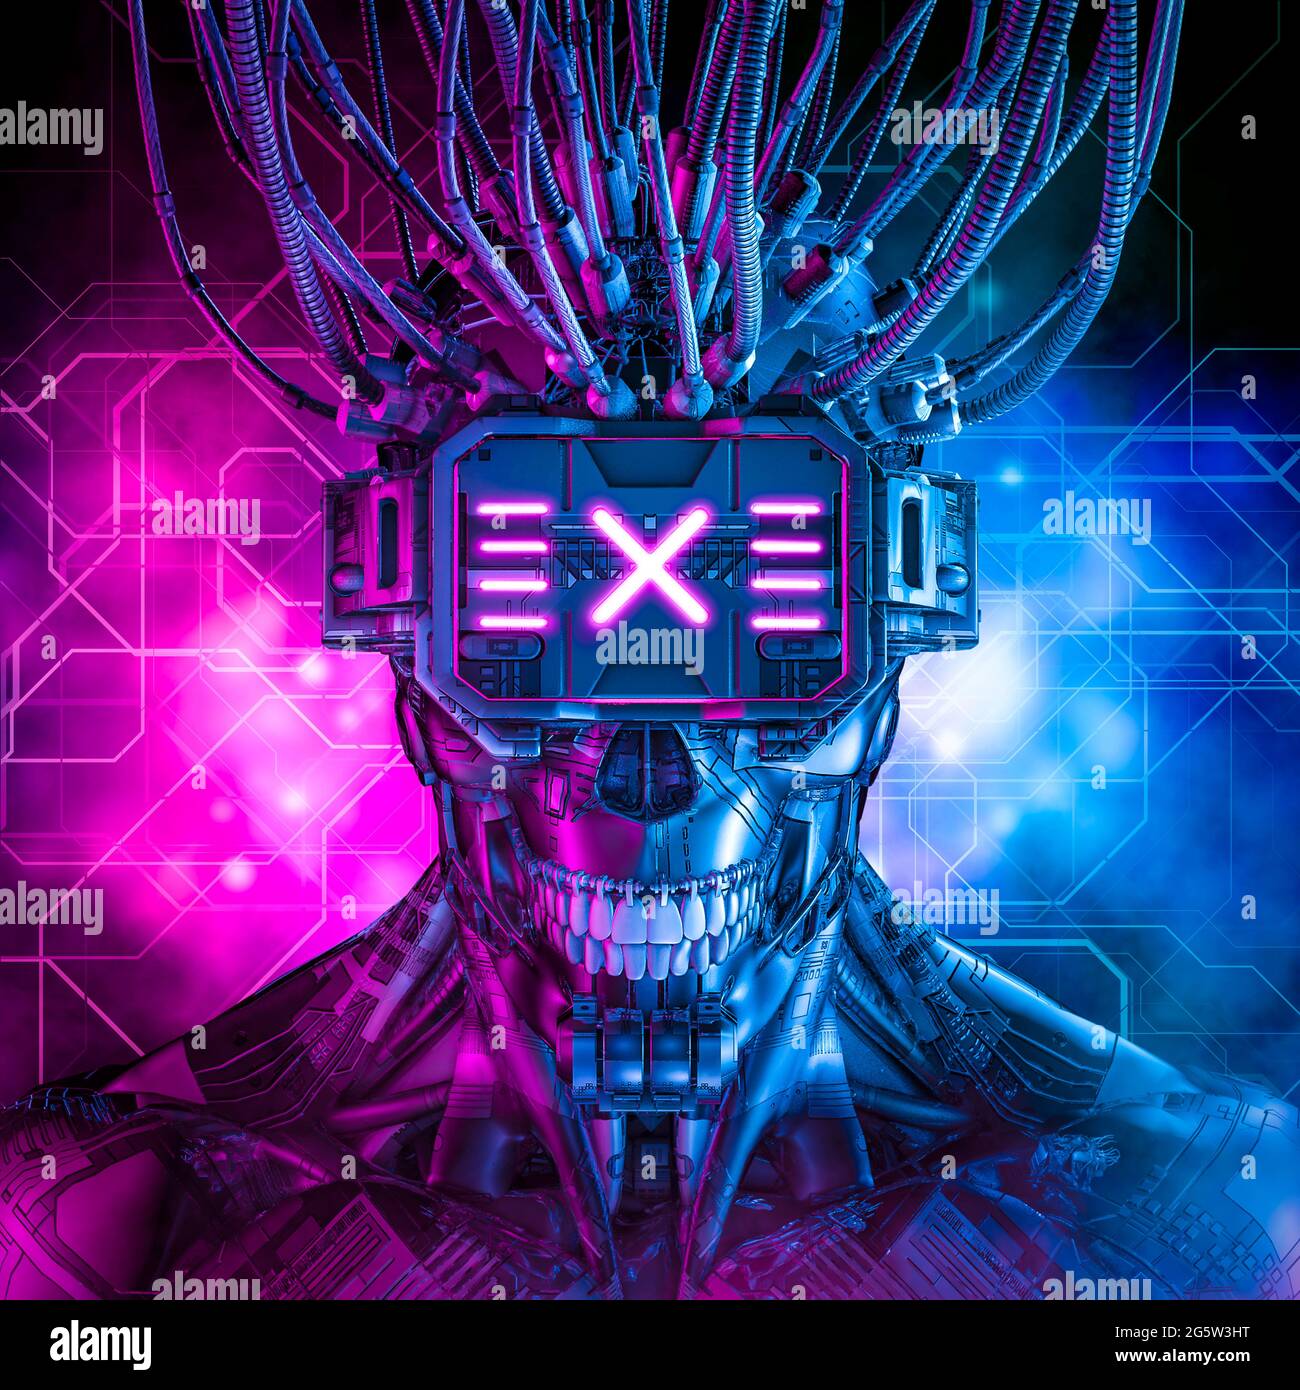 Hardwired cyberpunk skull robot / 3D illustration of science fiction cyberpunk skull faced grinning android wearing futuristic virtual reality glasses Stock Photo